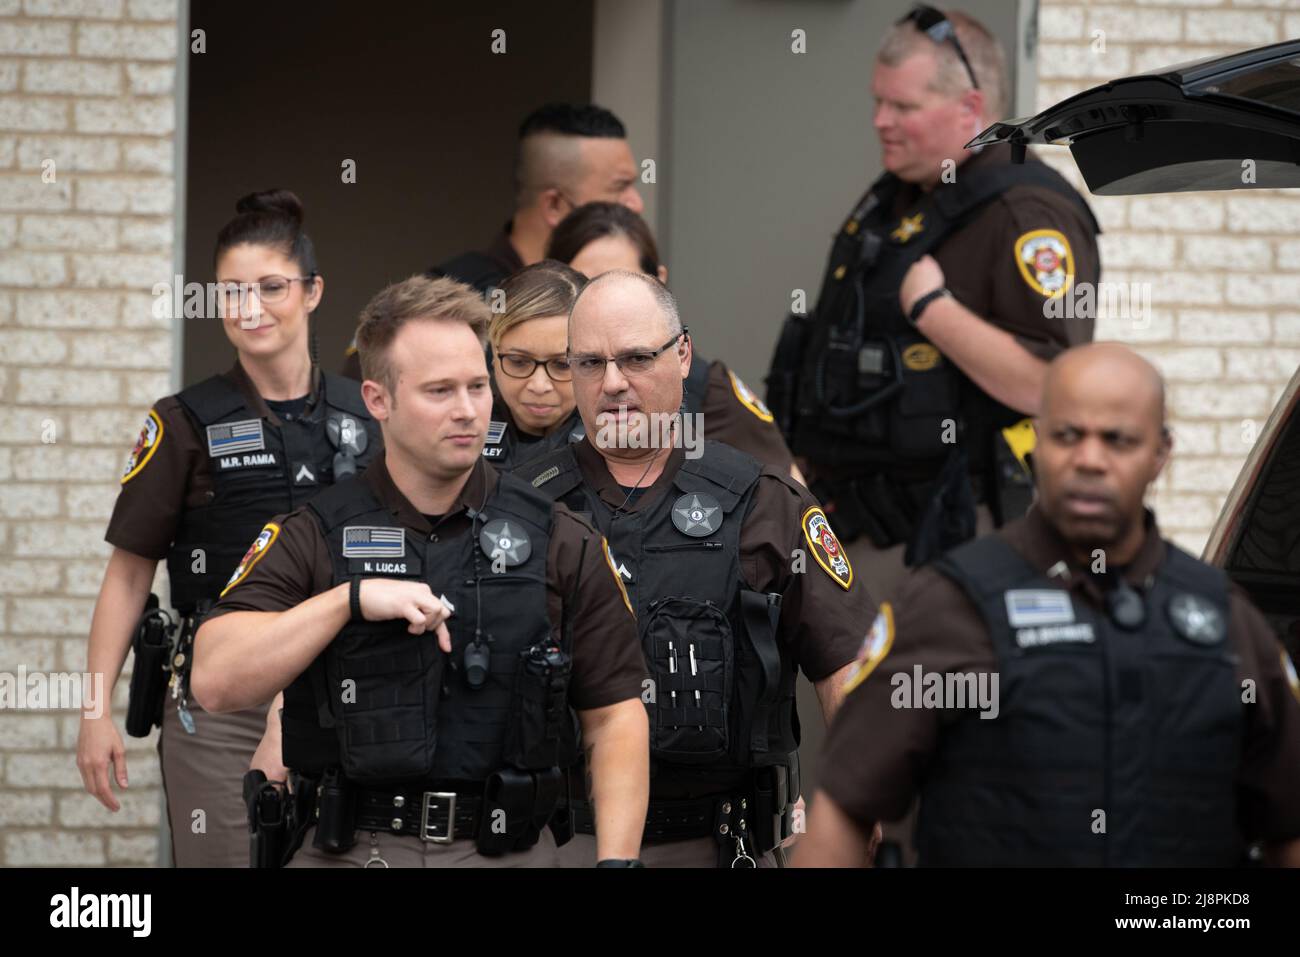 Fairfax County Sheriff’s Deputies exit the courthouse to provide crowd control for Johnny Depp and Amber Hearts departure from the Fairfax County Courthouse, in Fairfax, at the close of another day in his civil trial with Amber Heard, Thursday, May 5, 2022. Depp brought a defamation lawsuit against his former wife, actress Amber Heard, after she wrote an op-ed in The Washington Post in 2018 that, without naming Depp, accused him of domestic abuse.Credit: Cliff Owen / CNP/Sipa USA  (RESTRICTION: NO New York or New Jersey Newspapers or newspapers within a 75 mile radius of New York City) Stock Photo